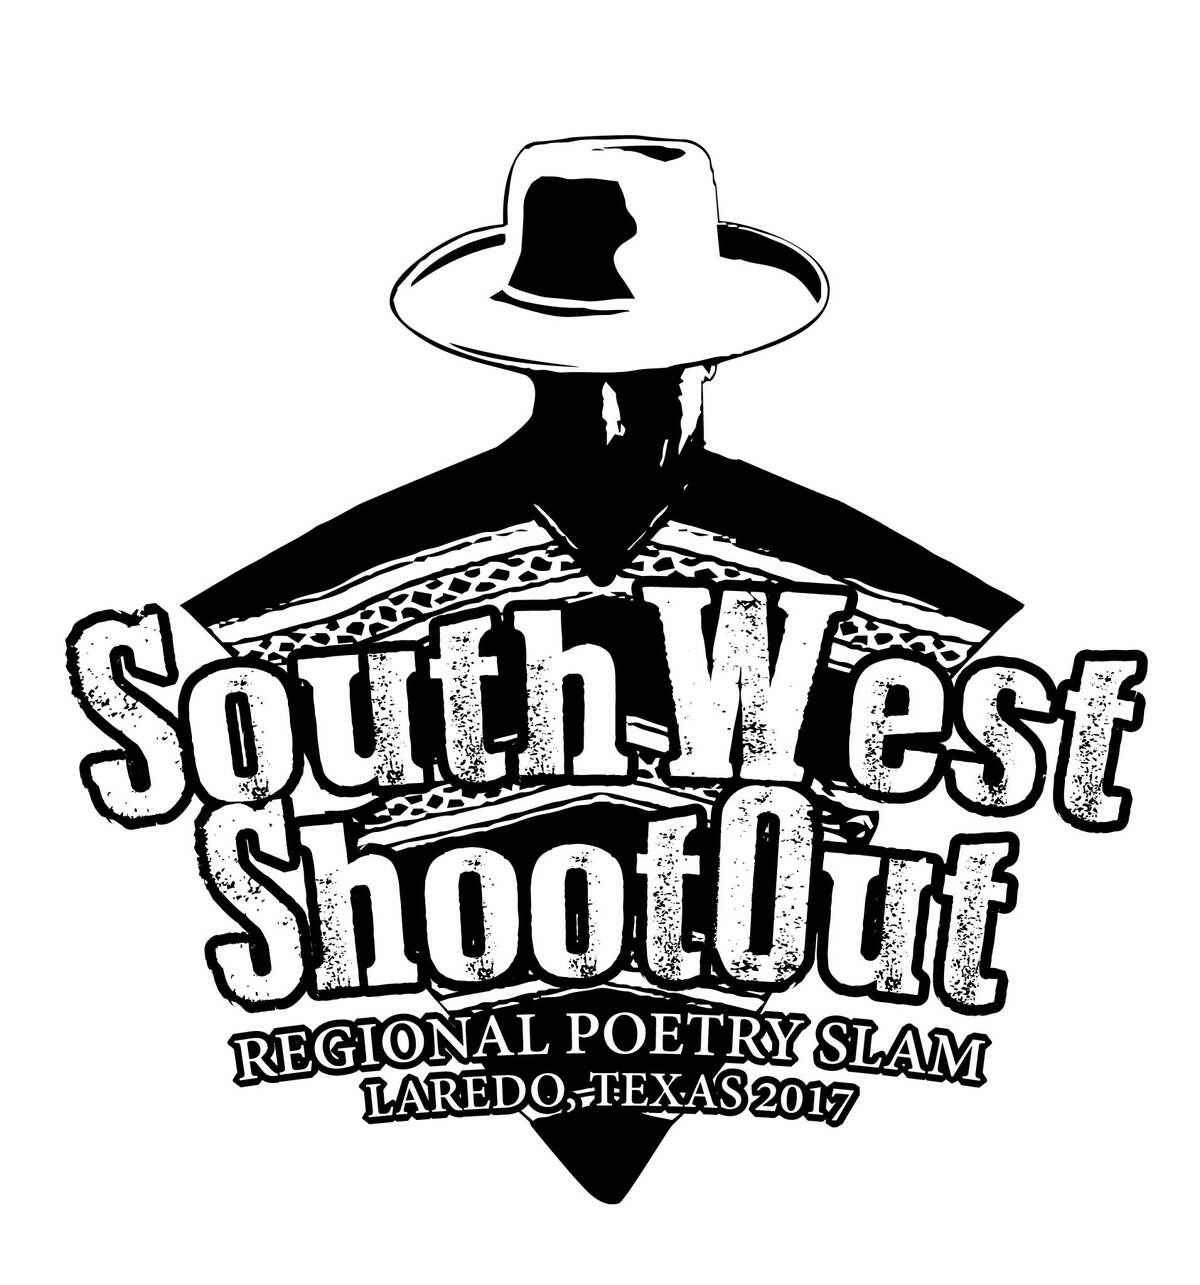 For the first time Laredo BorderSlam (LBS) will host 10 teams of up to five poets from New Mexico, Louisiana and across the state of Texas for the annual SouthWest ShootOut (SWSO).